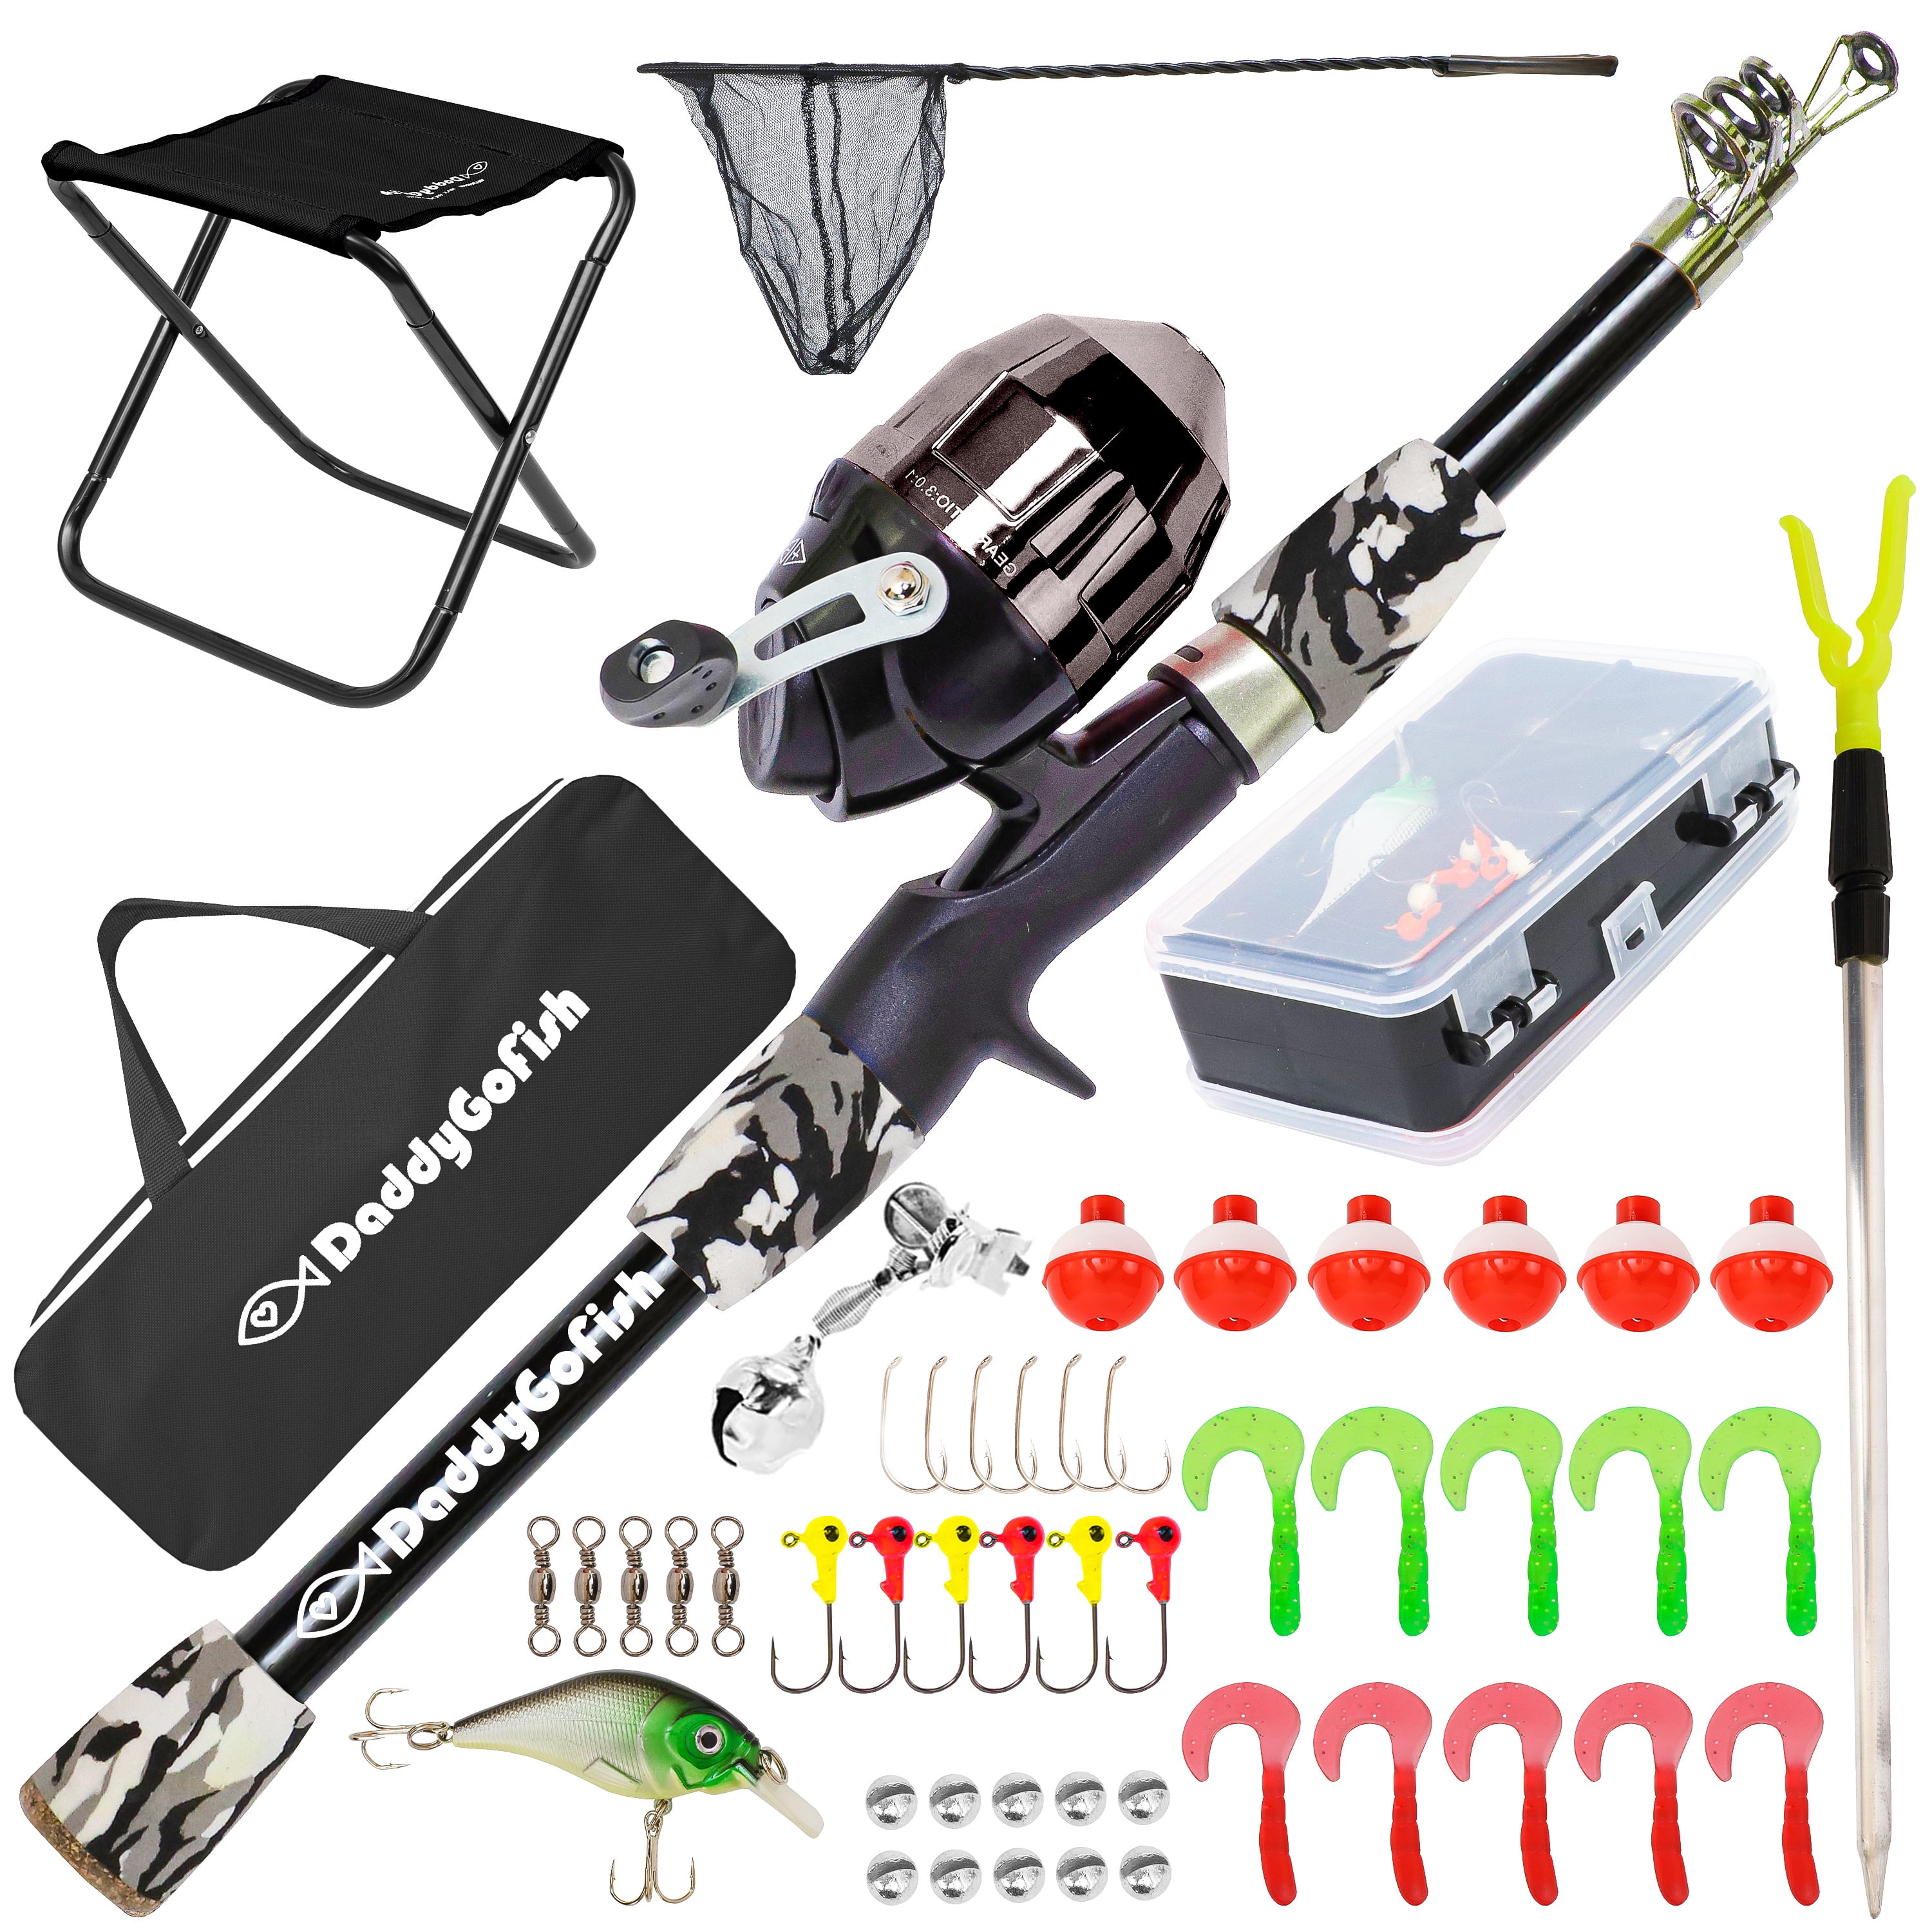 Kids Fishing Pole Set Portable Telescopic Kids Fishing Rod and Reel Combo  Kit with Tackle Box for Beginners, Boys,Girls,Youth,Children 